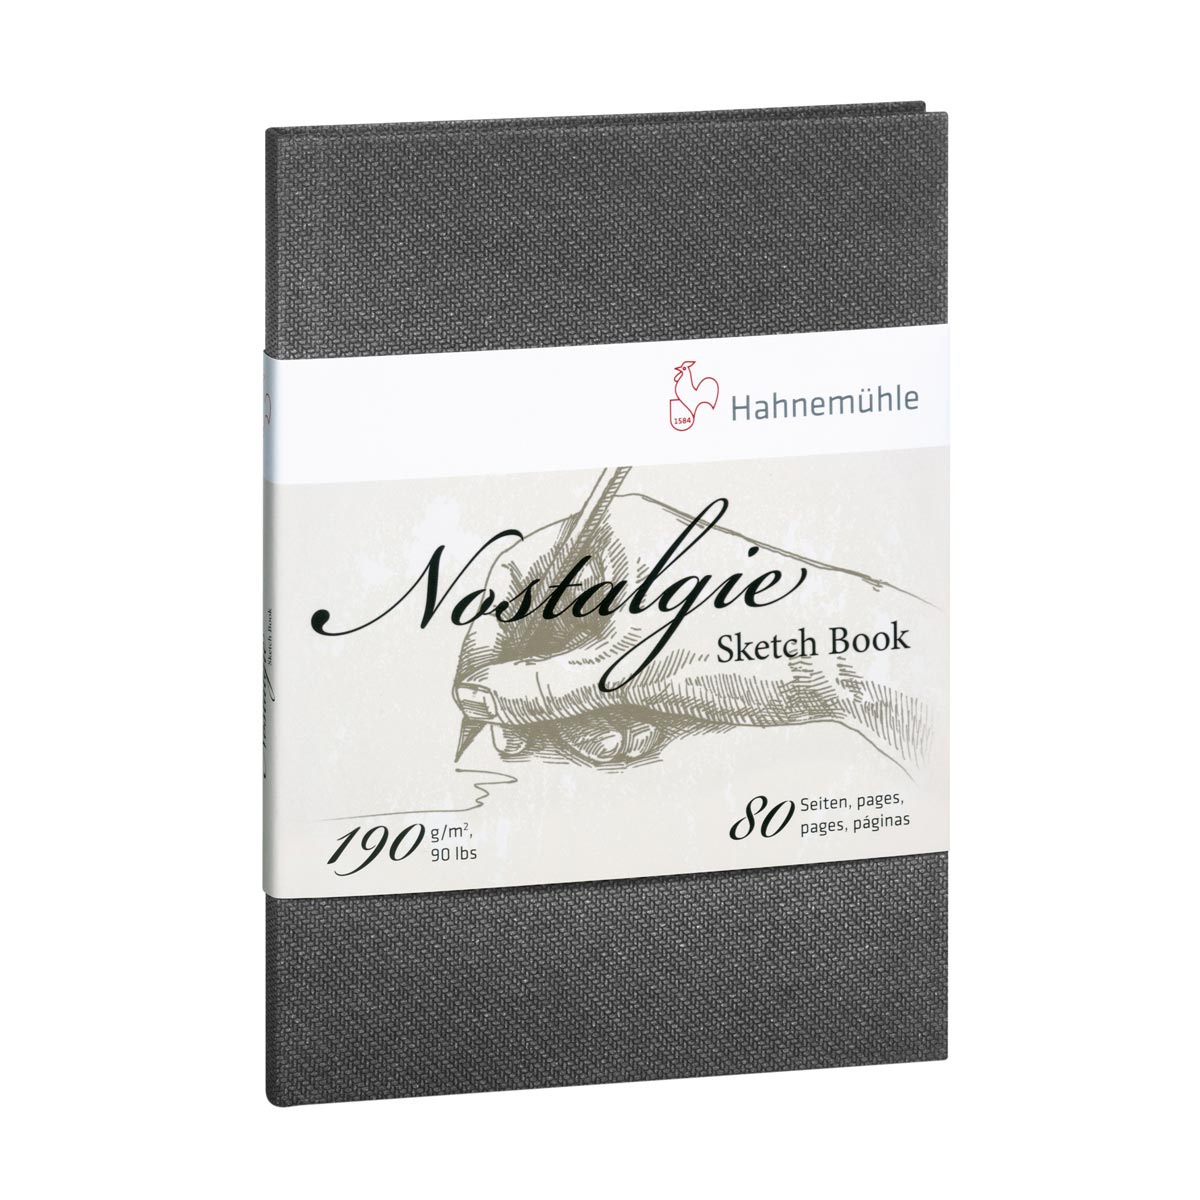 Hahnemuhle - Nostalgie Sketch Book - A5 190gsm - Ritratto